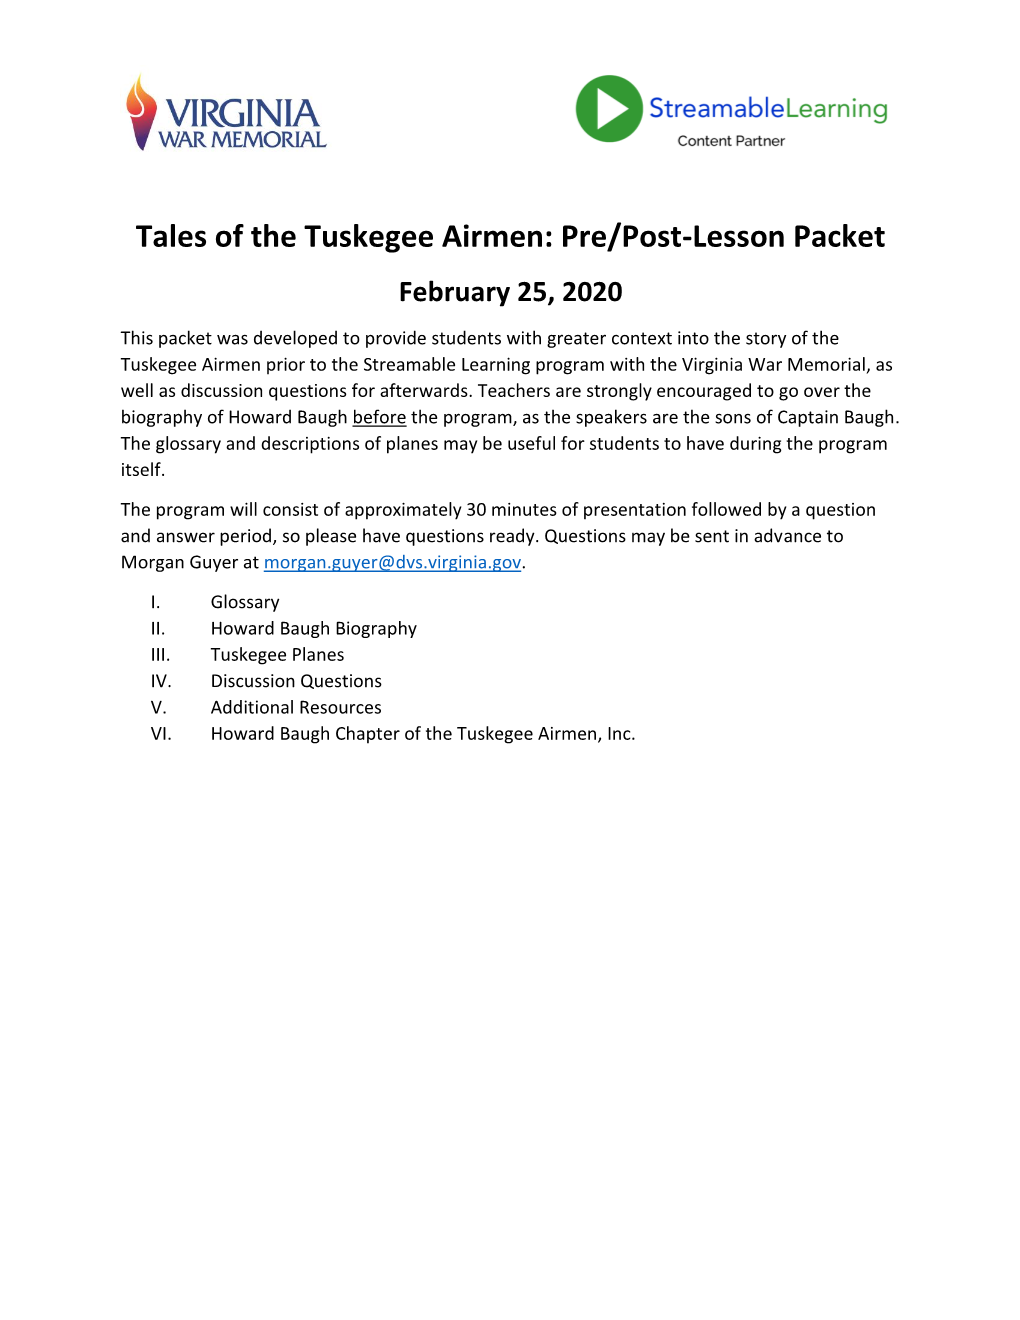 Tales of the Tuskegee Airmen: Pre/Post-Lesson Packet February 25, 2020